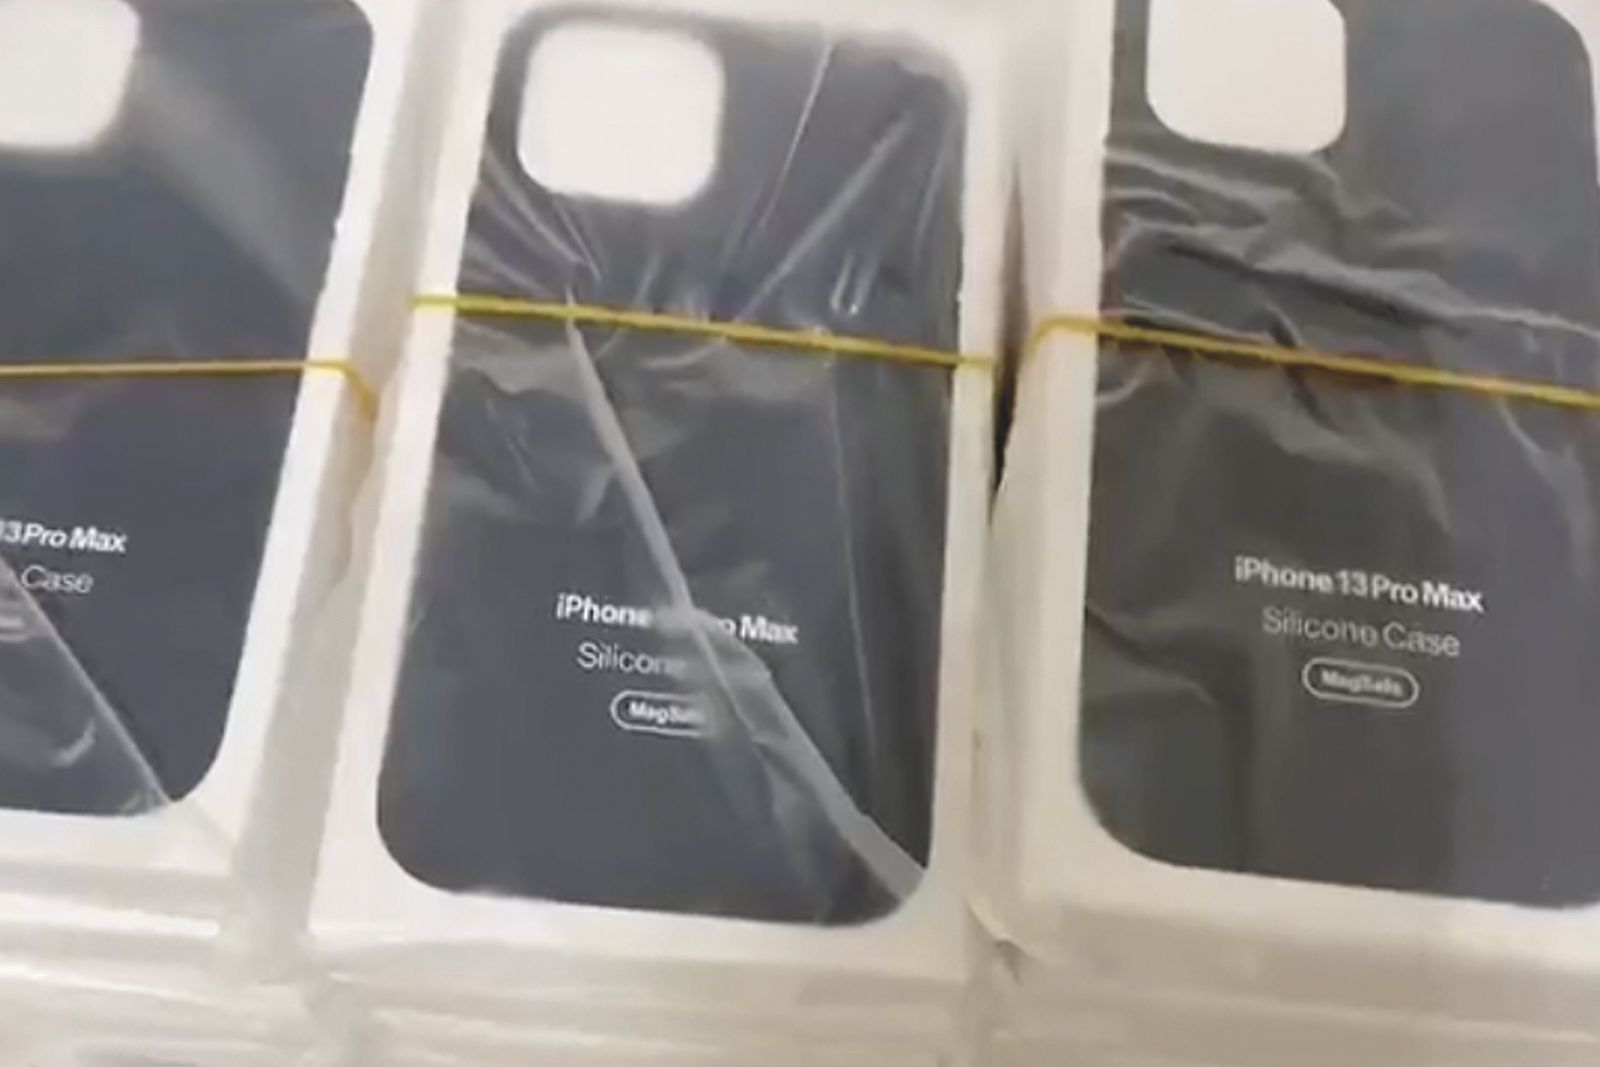 Alleged iPhone 13 case packaging confirms name photo 1